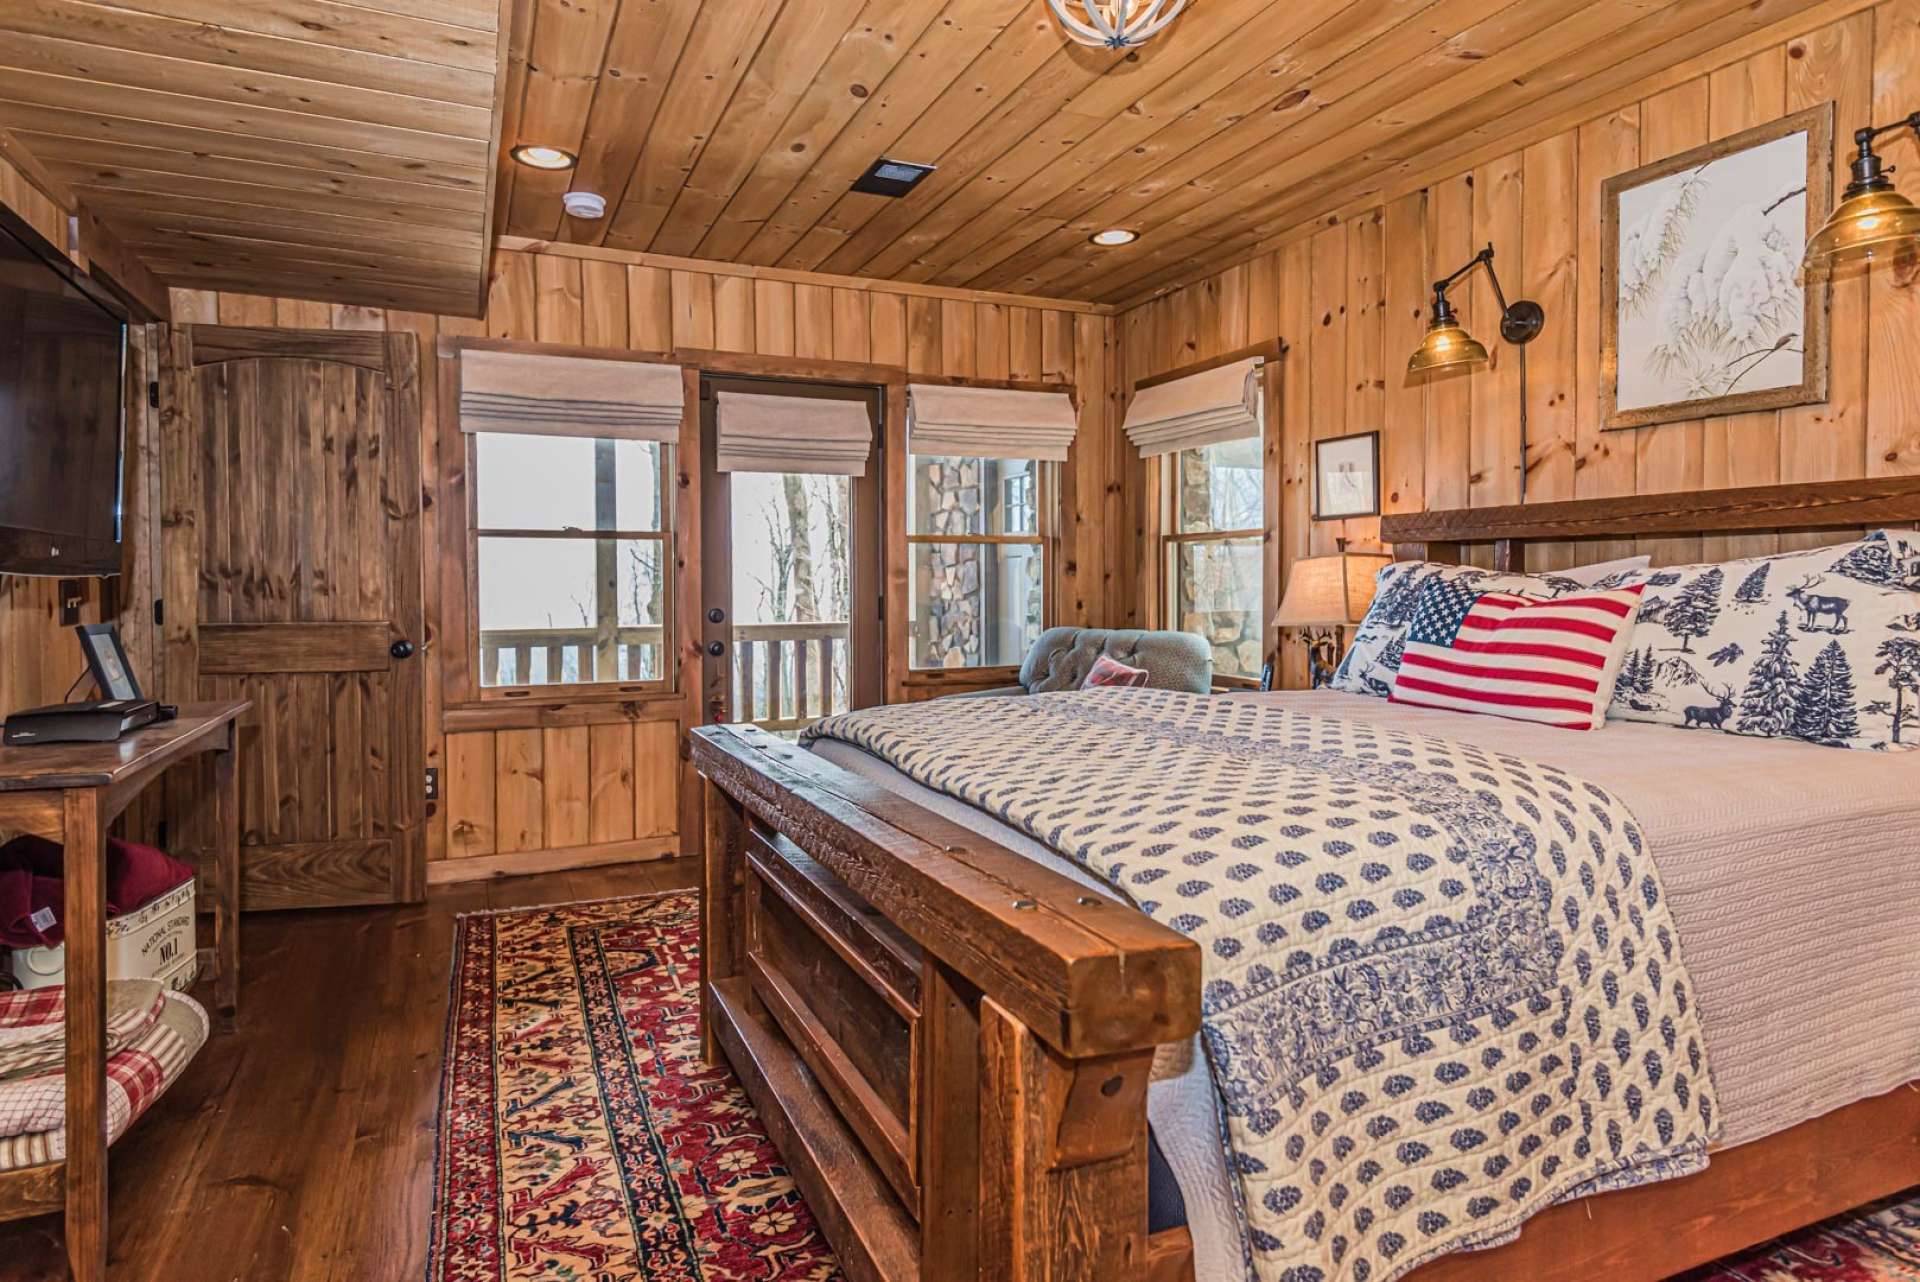 YOur overnight guests will have access to lower level deck with a convenient storage room for your mountain toys.